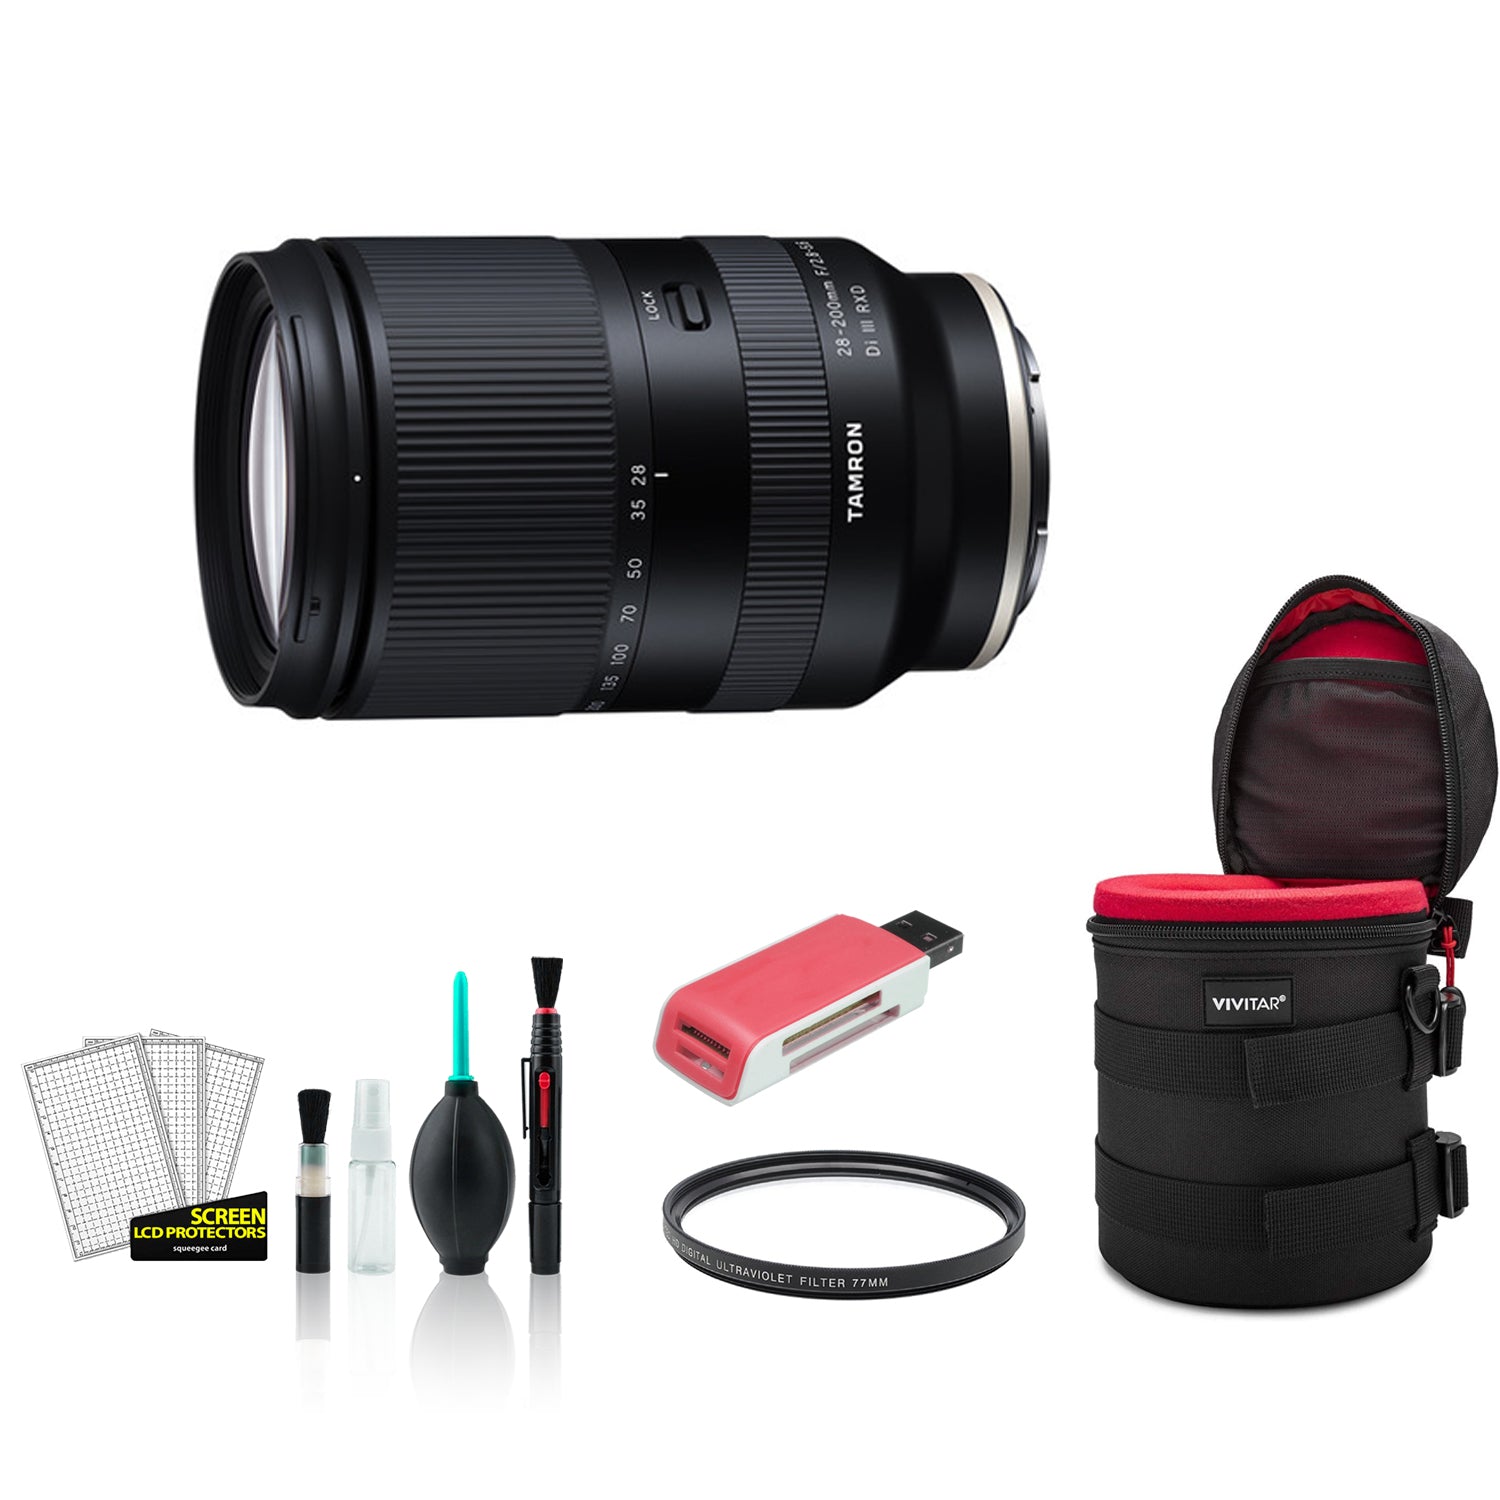 Tamron 28-200mm for Sony E f/2.8-5.6 Di III RXD Lens with UV Filter (International Model) Bundle